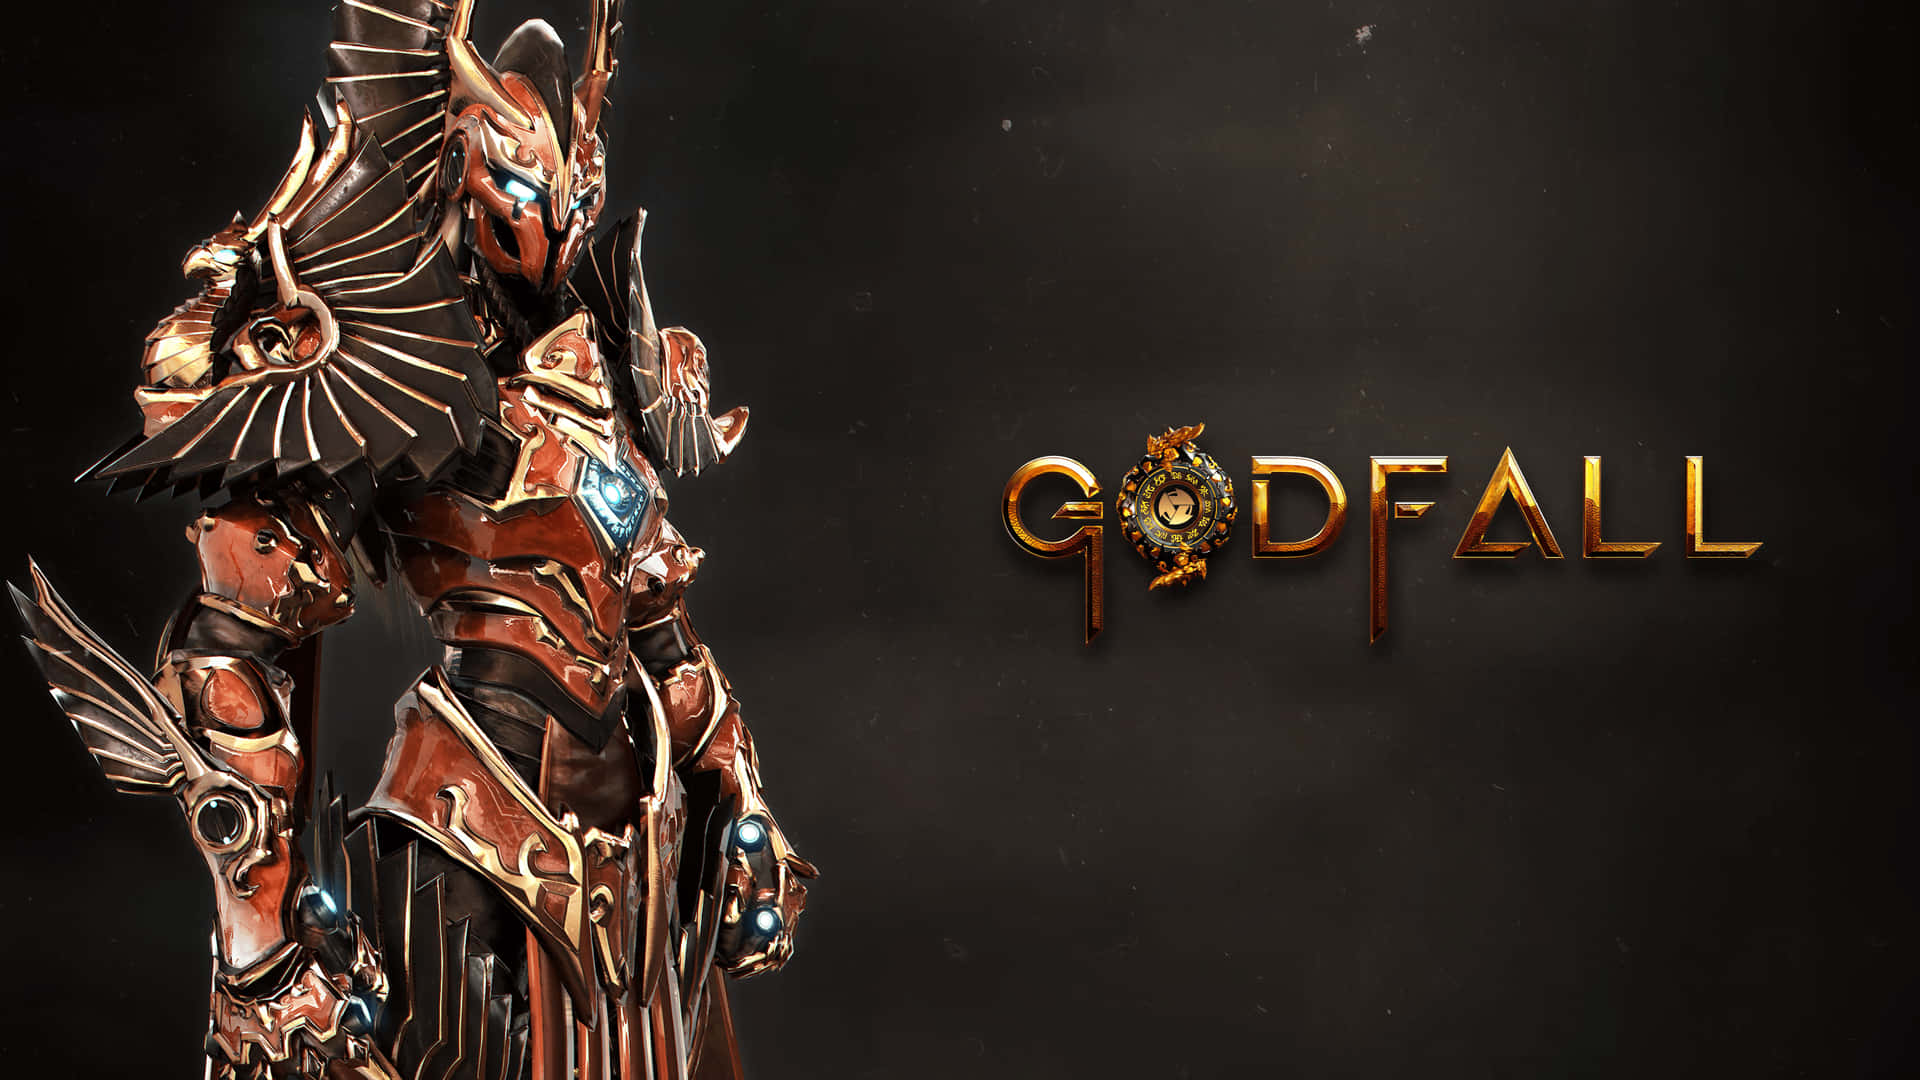 Download this gorgeous Best Godfall background and enjoy the game